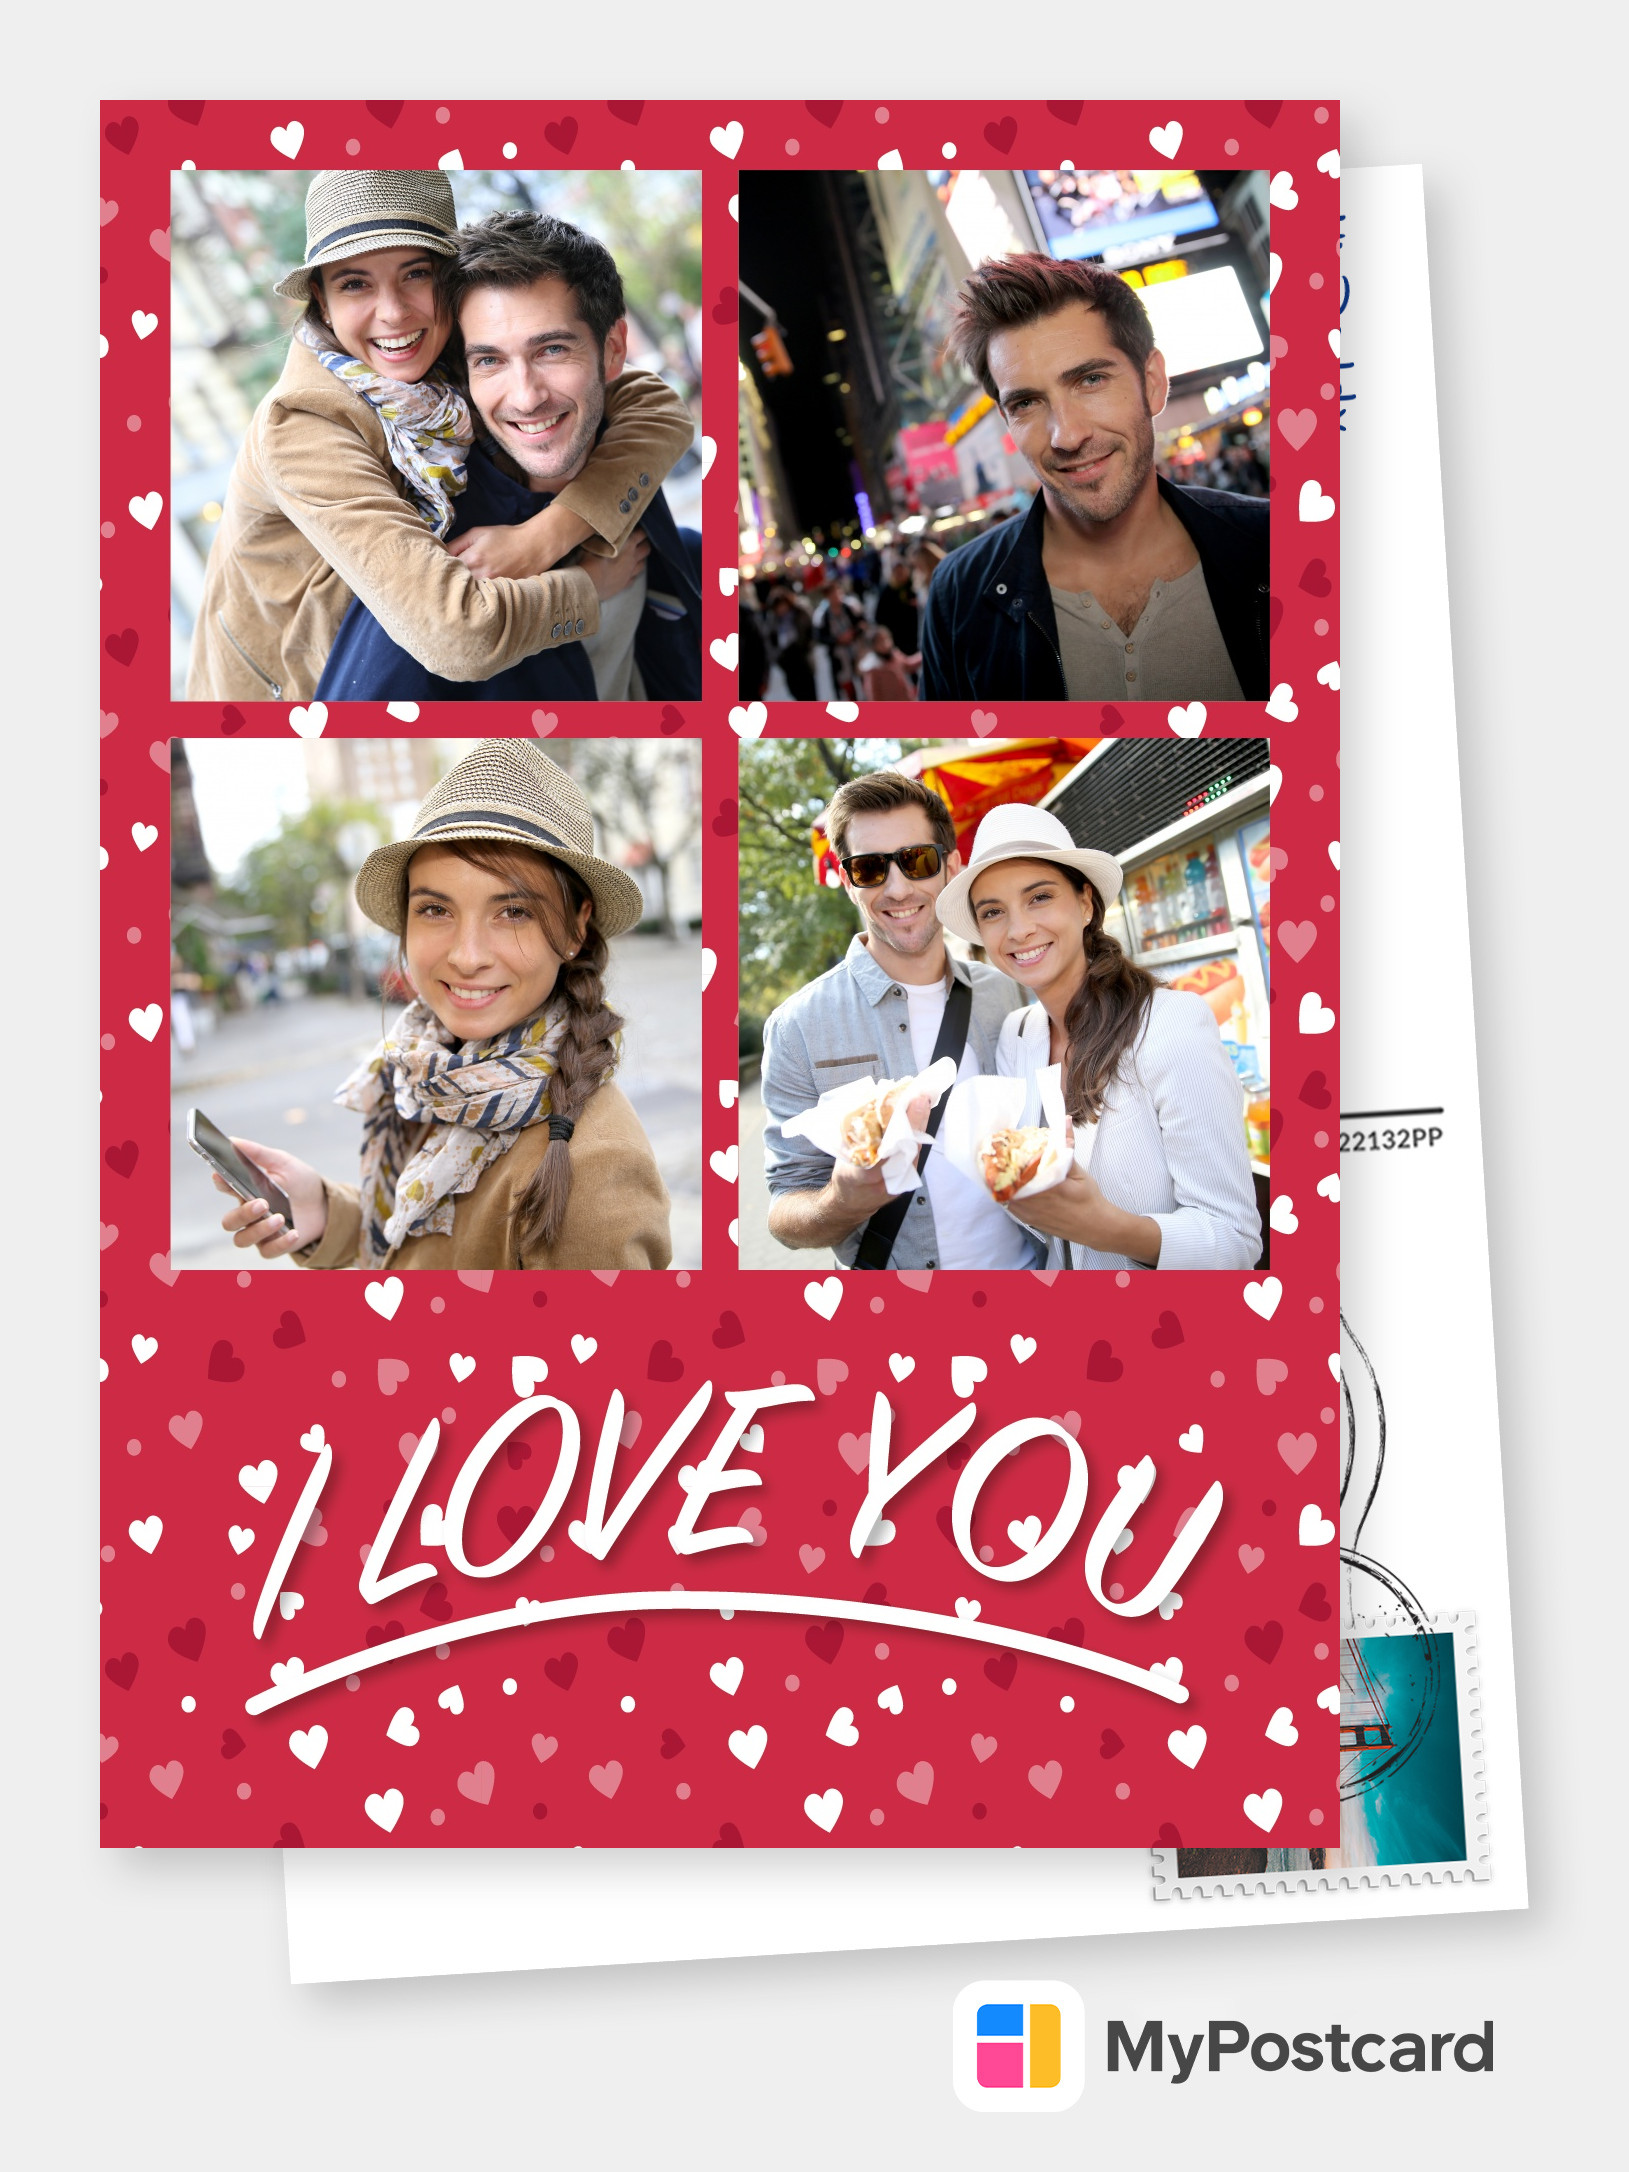 Free Printable I Love You Photo Cards Templates Print And Mailed For You Online Printed I Love You Photo Cards We Print Your I Love You Photo Cards International